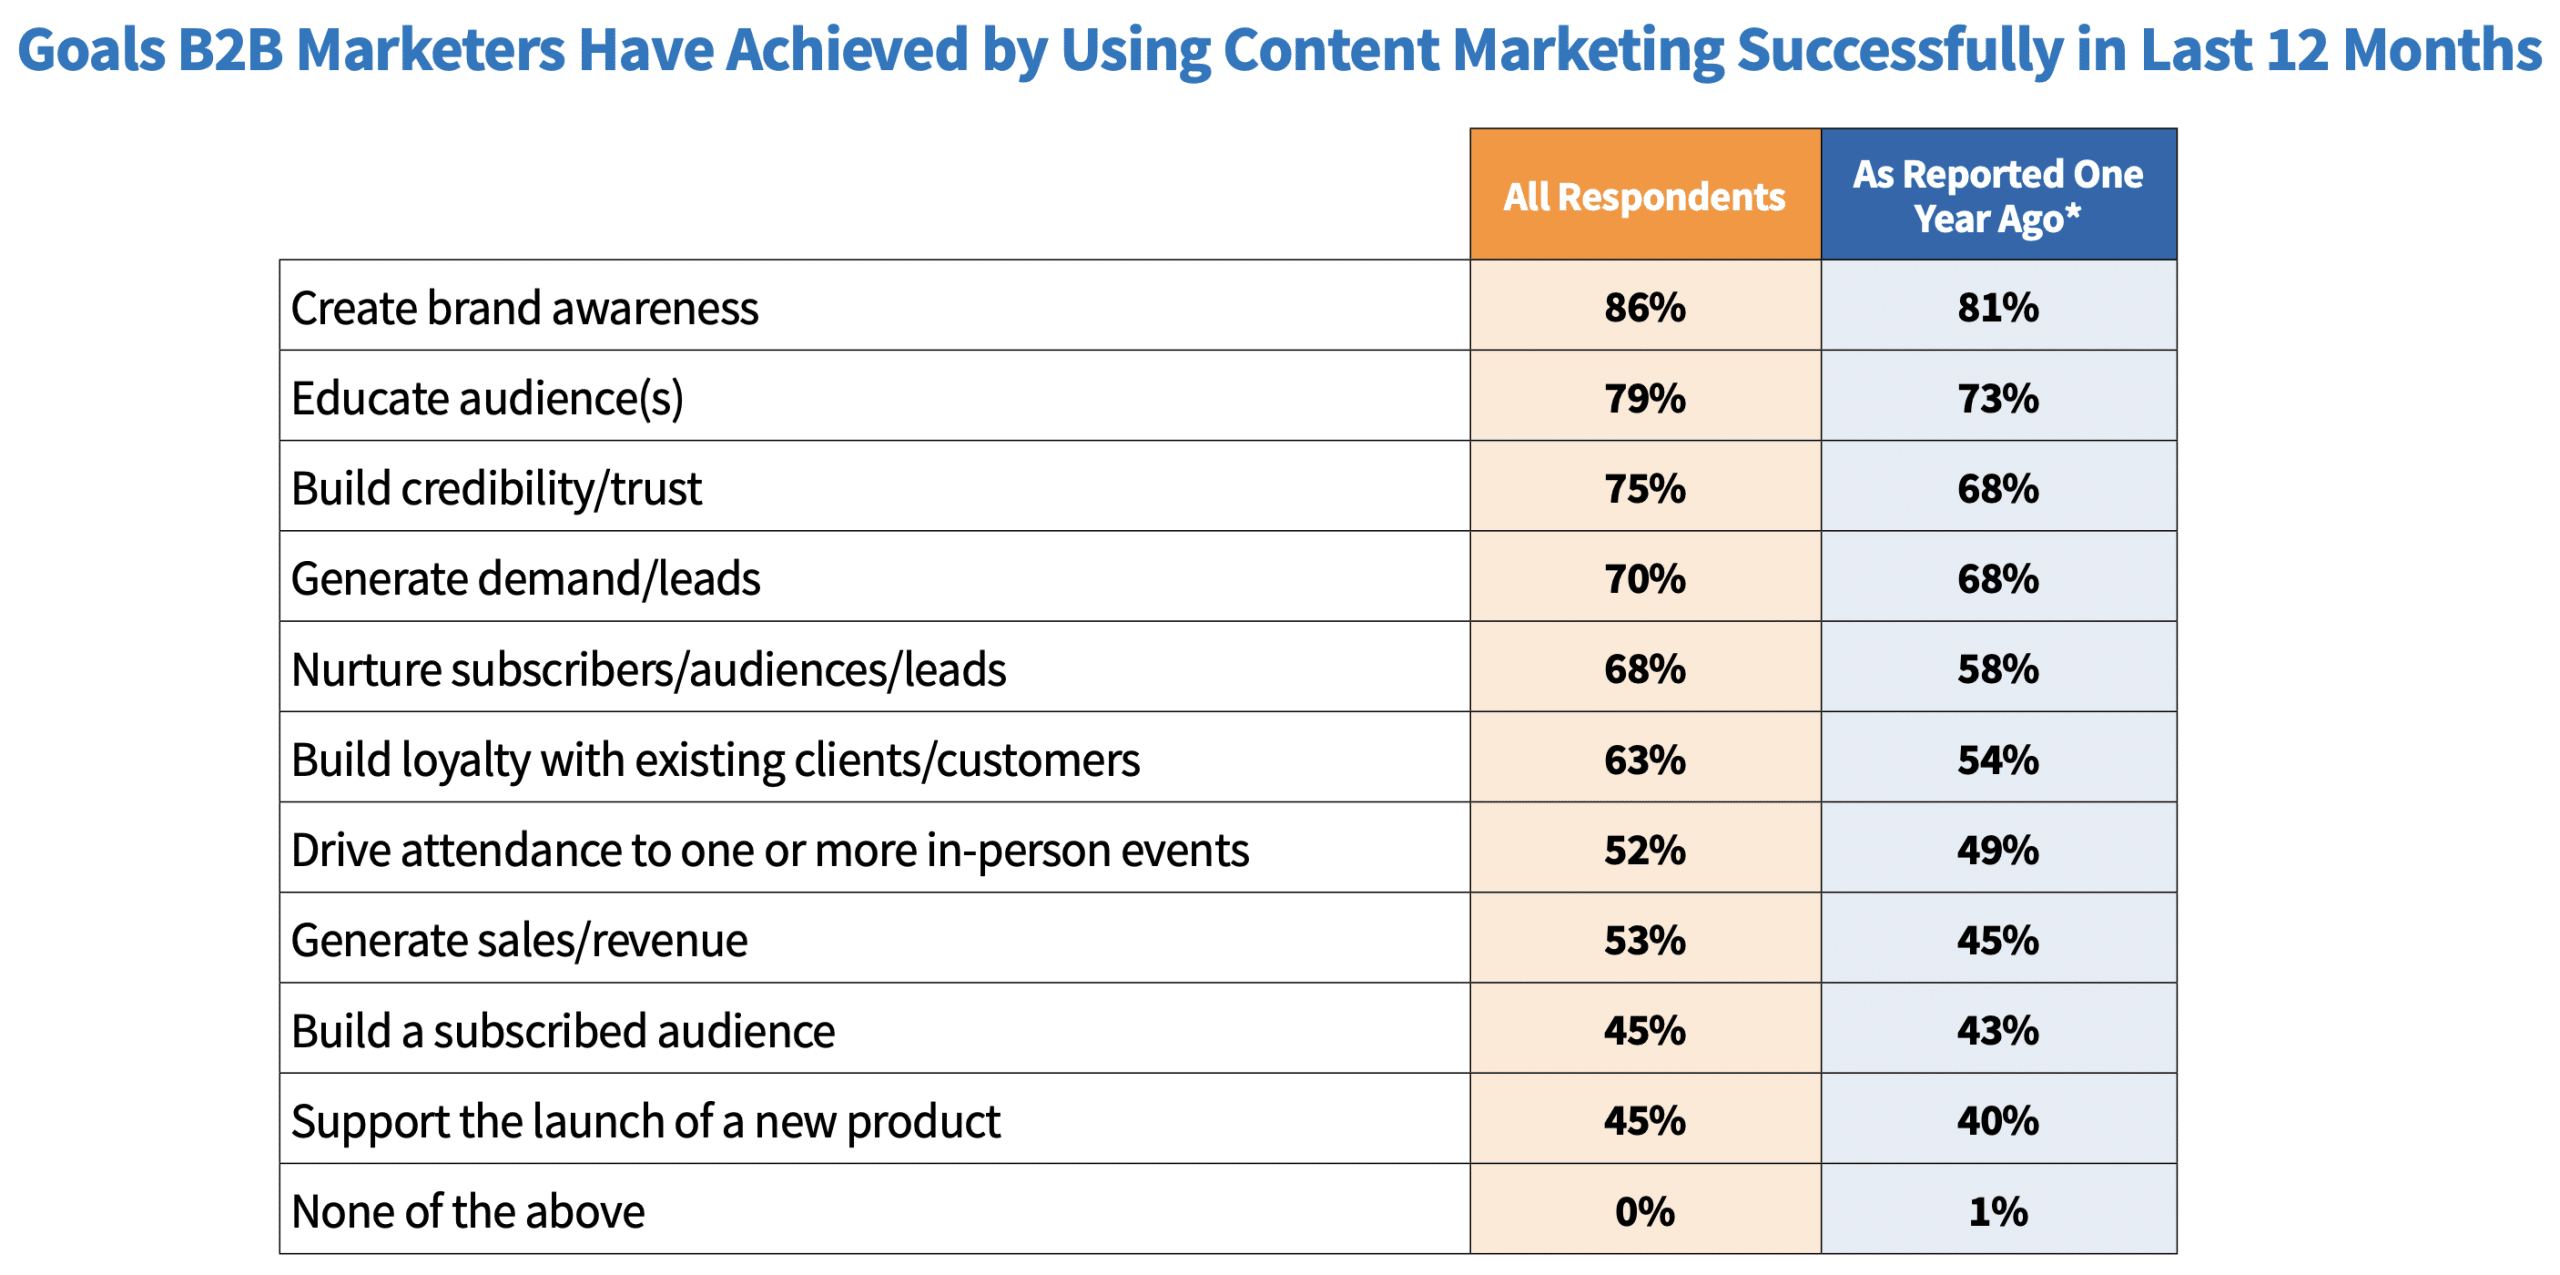 chart shows that most B2B marketers use content marketing to increase brand awareness, educate their audience and build credibility